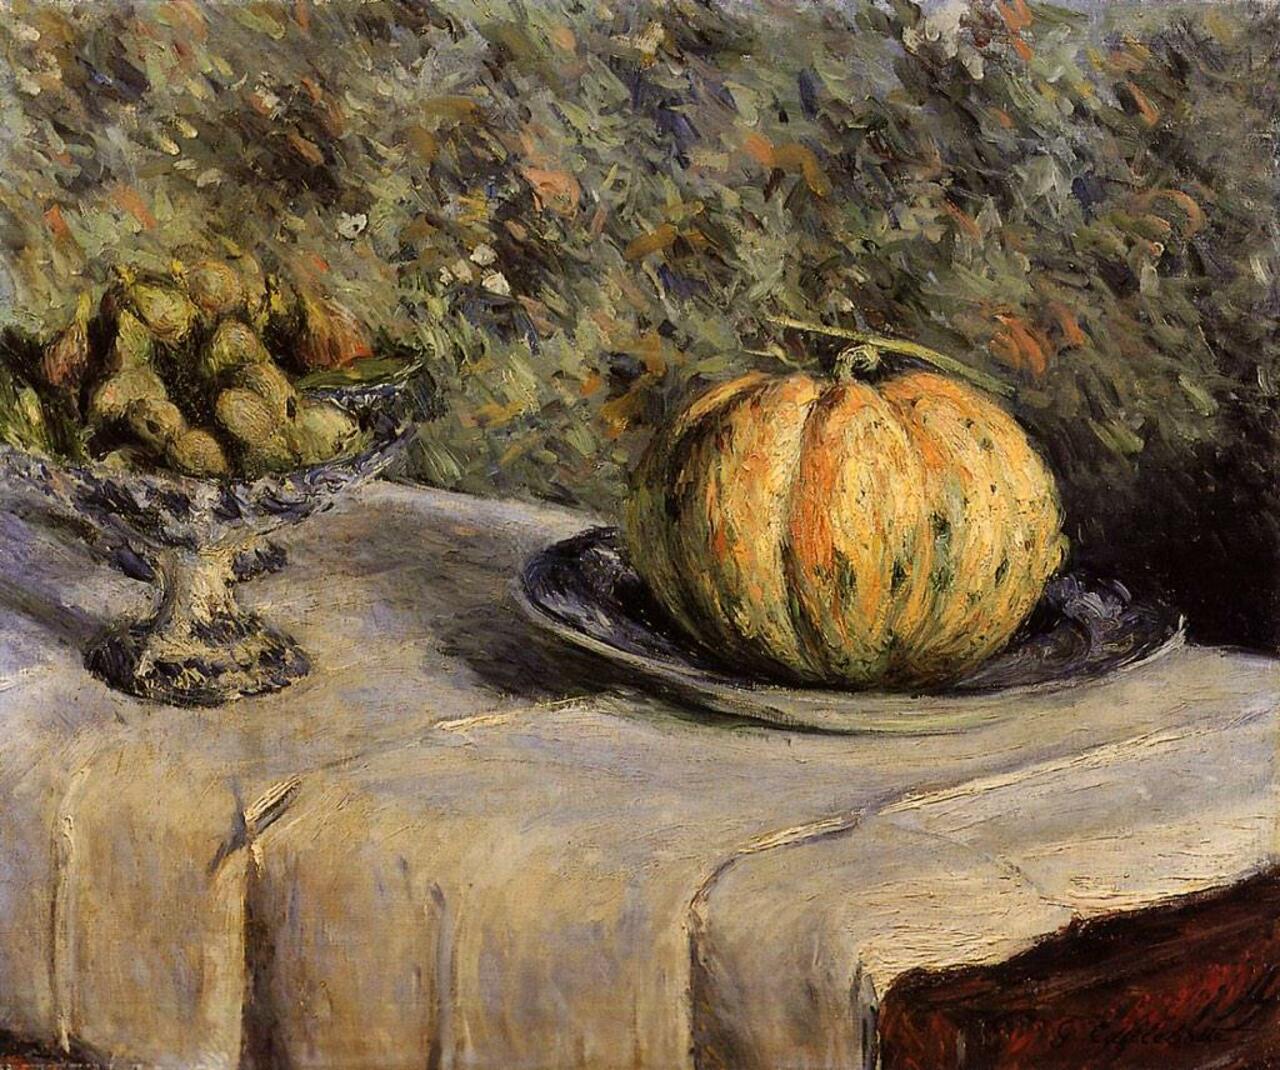 “@geminicat7: 'Melon and Bowl of Figs'
Gustave Caillebotte, 1880-1882 #art http://t.co/mpALFh3yoD”